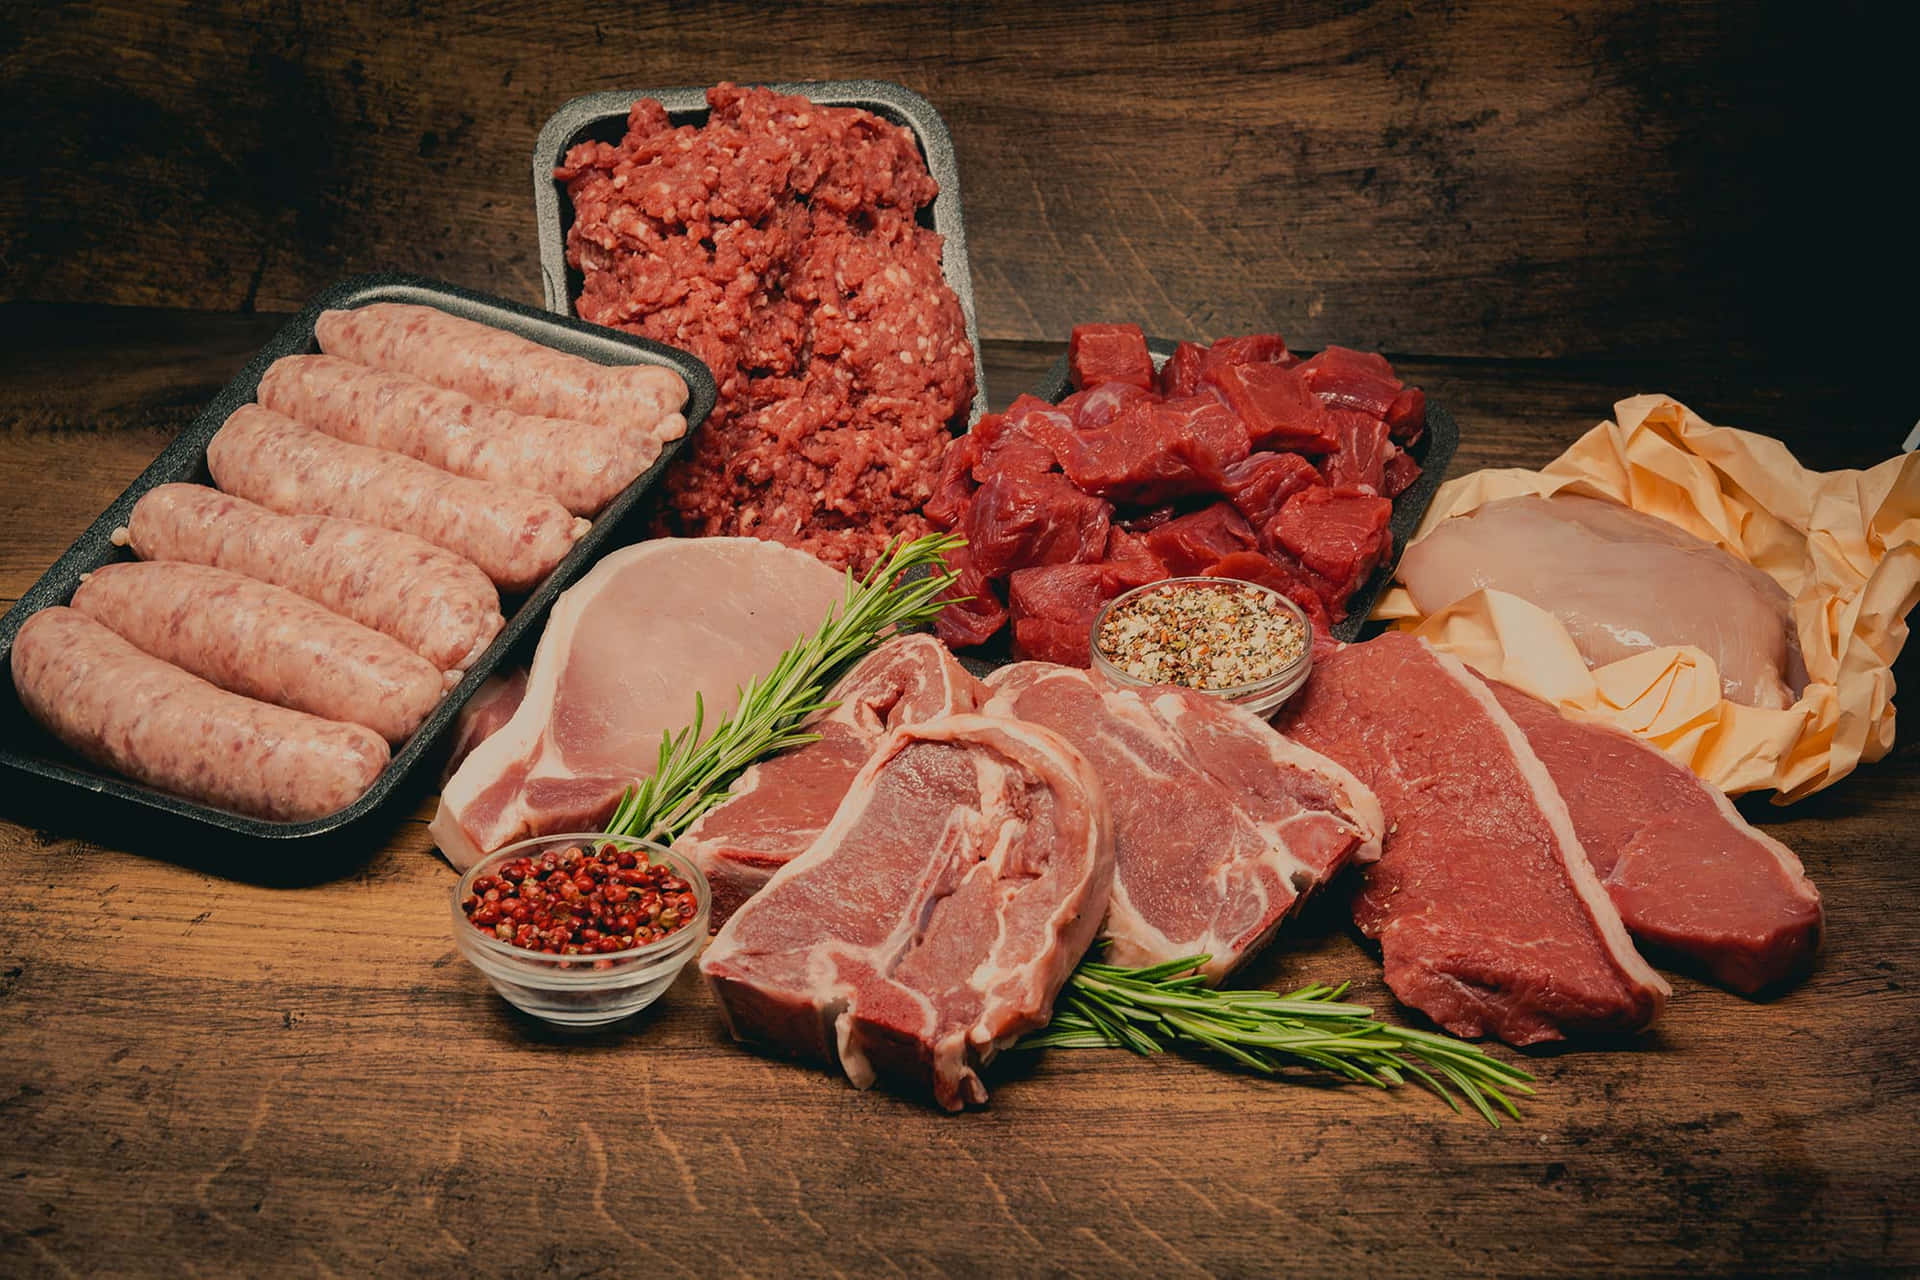 Download High-Quality Image of Assorted Meats | Wallpapers.com